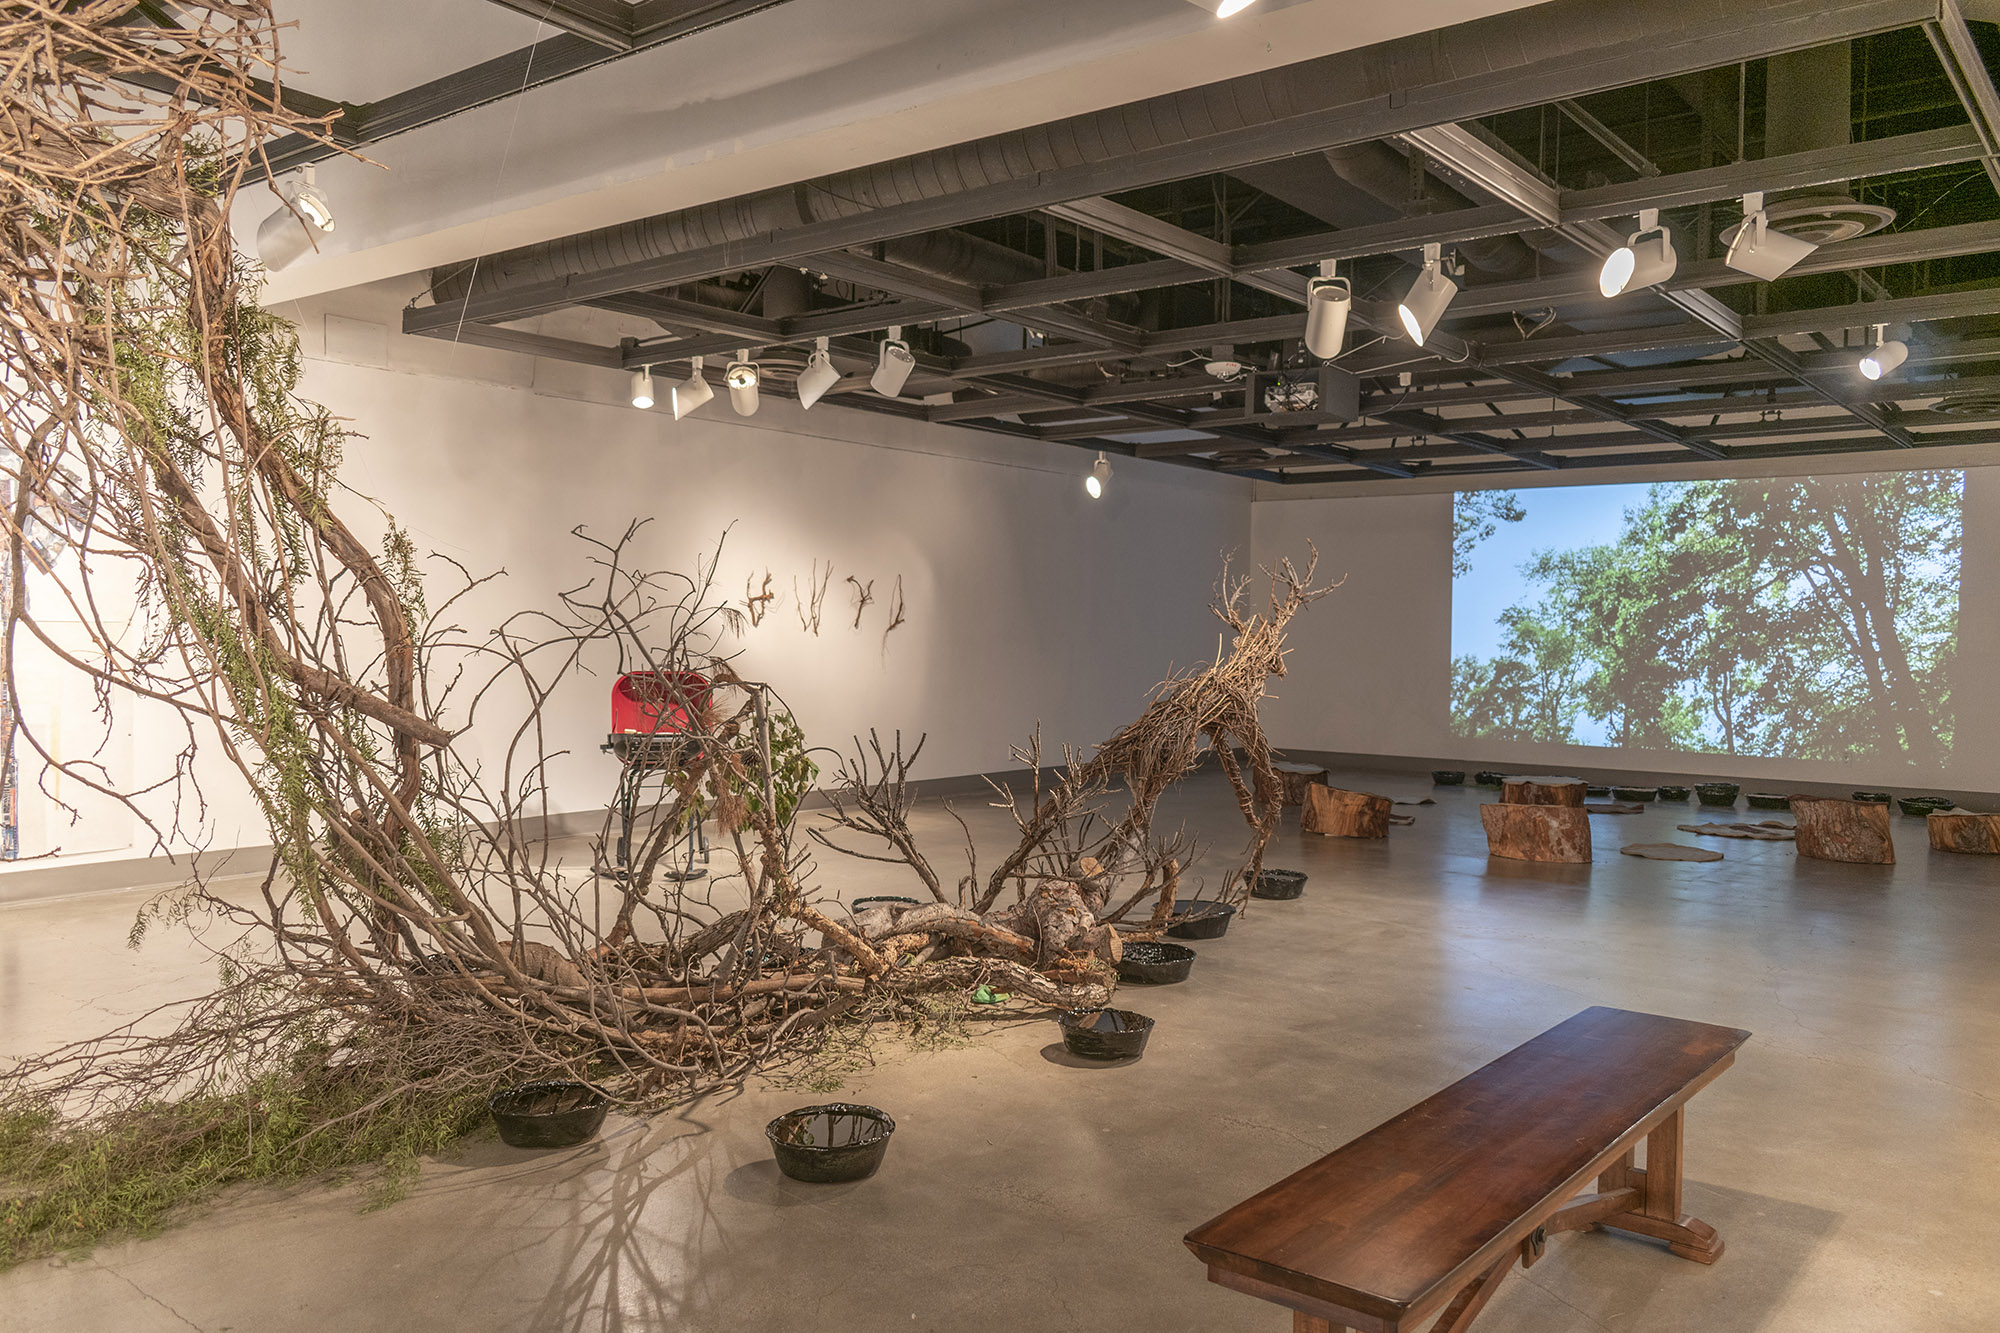 Installation View, Back of Gallery, St. Broxville Wood: Into the Thicket Exhibition. Artists: Jennifer Gunlock, Hilary Norcliffe, and Katie Stubblefield